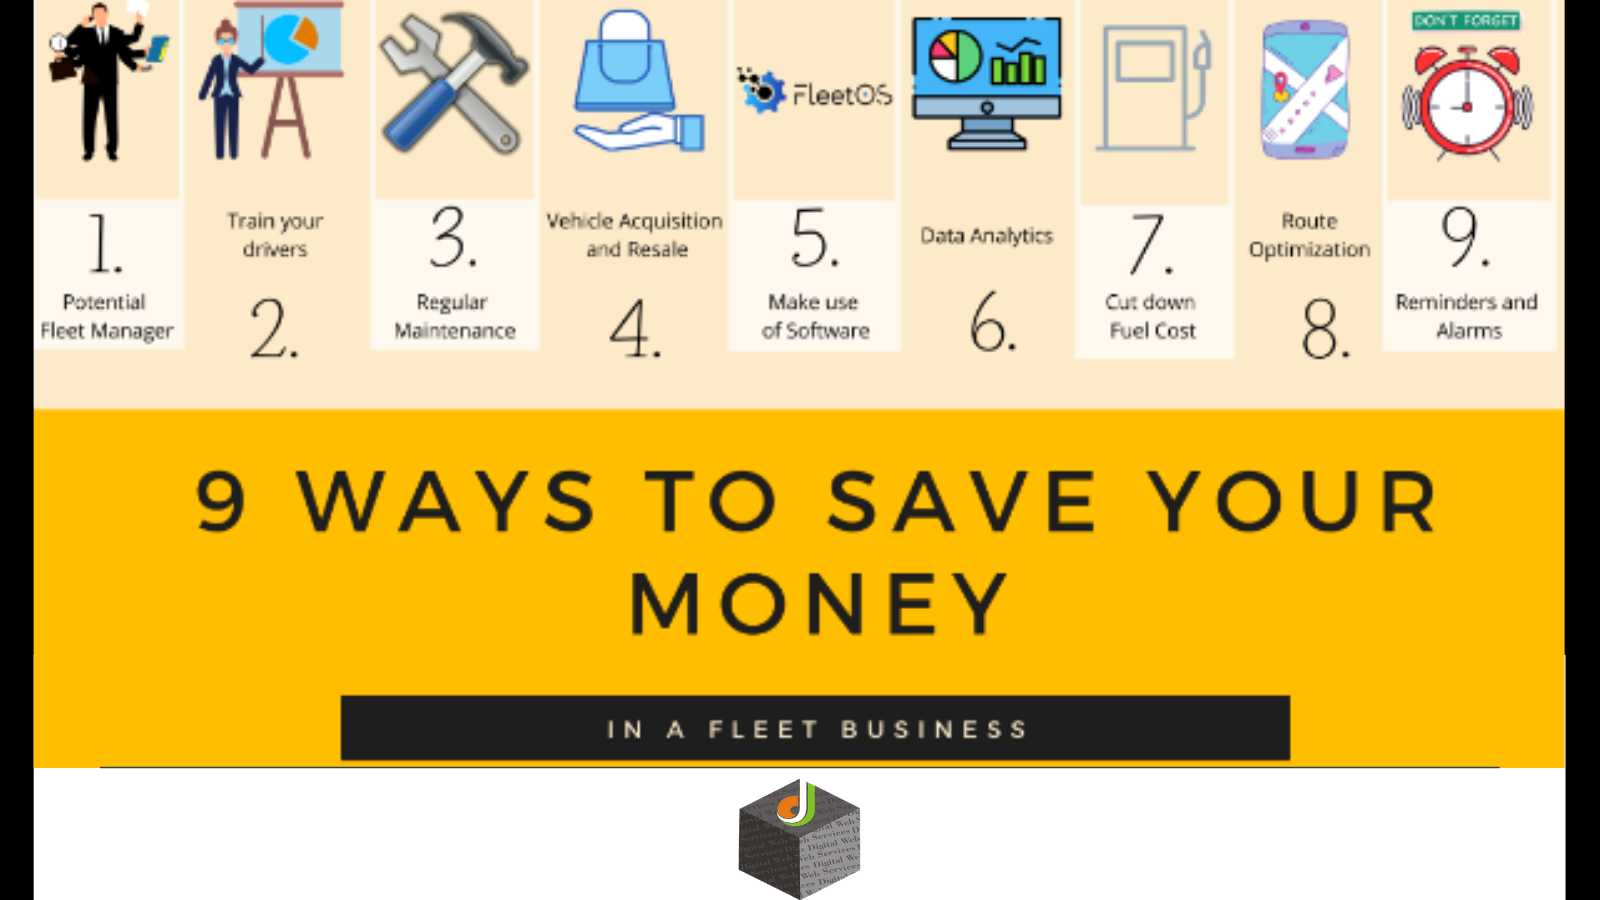 9 WAYS TO SAVE YOUR MONEY IN A FLEET BUSINESS